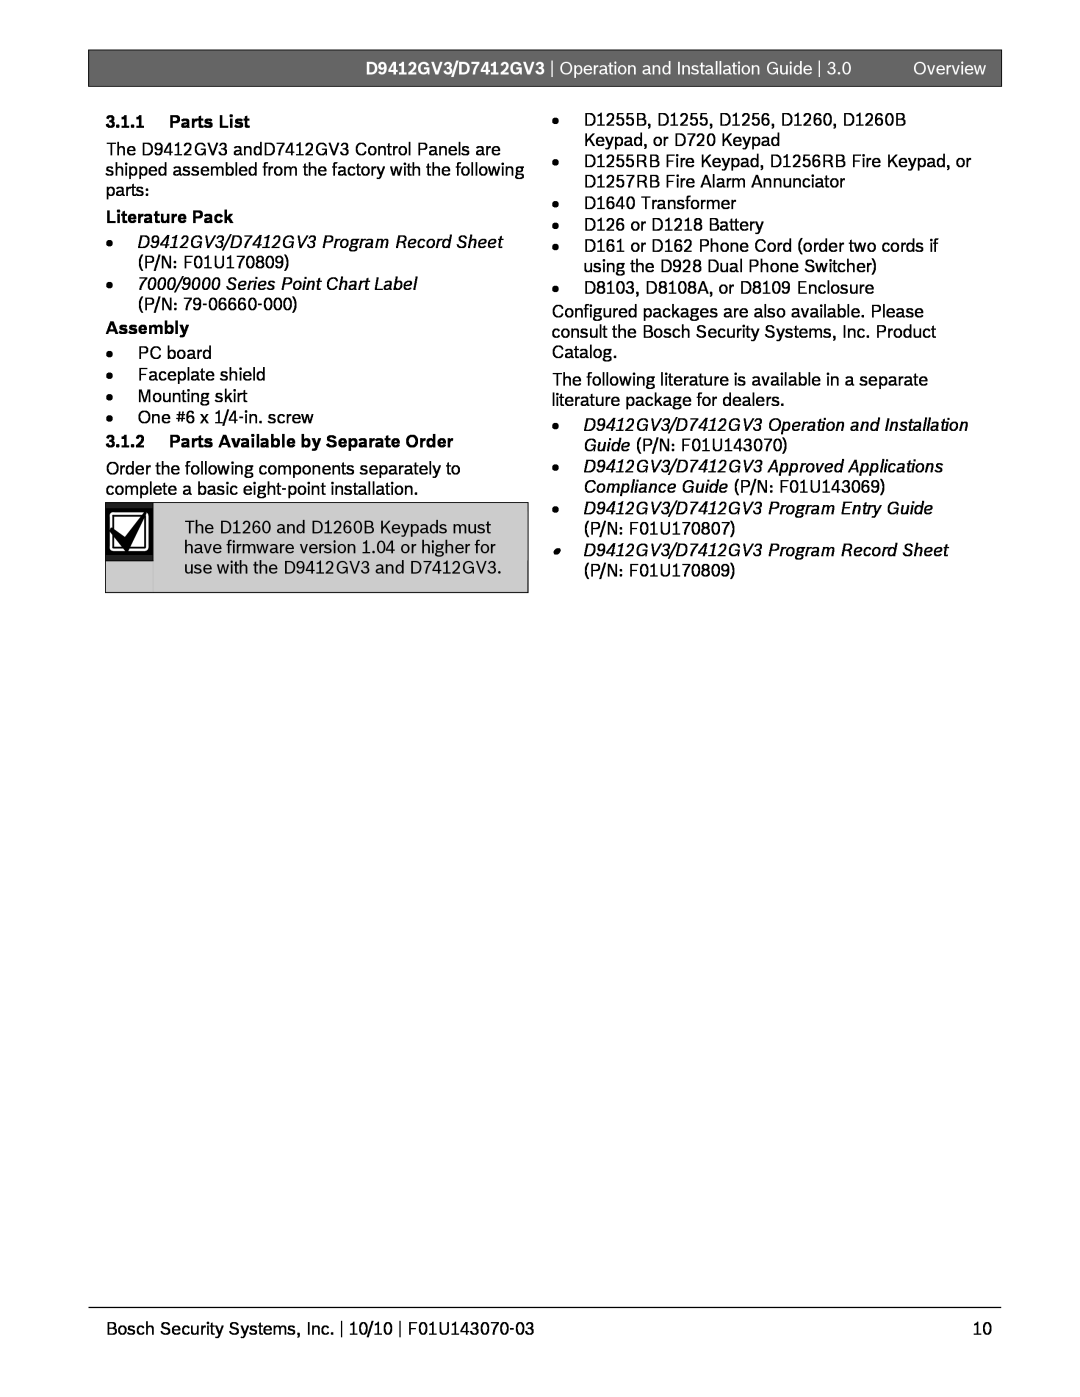 Bosch Appliances D9412GV3 3.1.1Parts List, Literature Pack, Assembly, 3.1.2Parts Available by Separate Order, Overview 